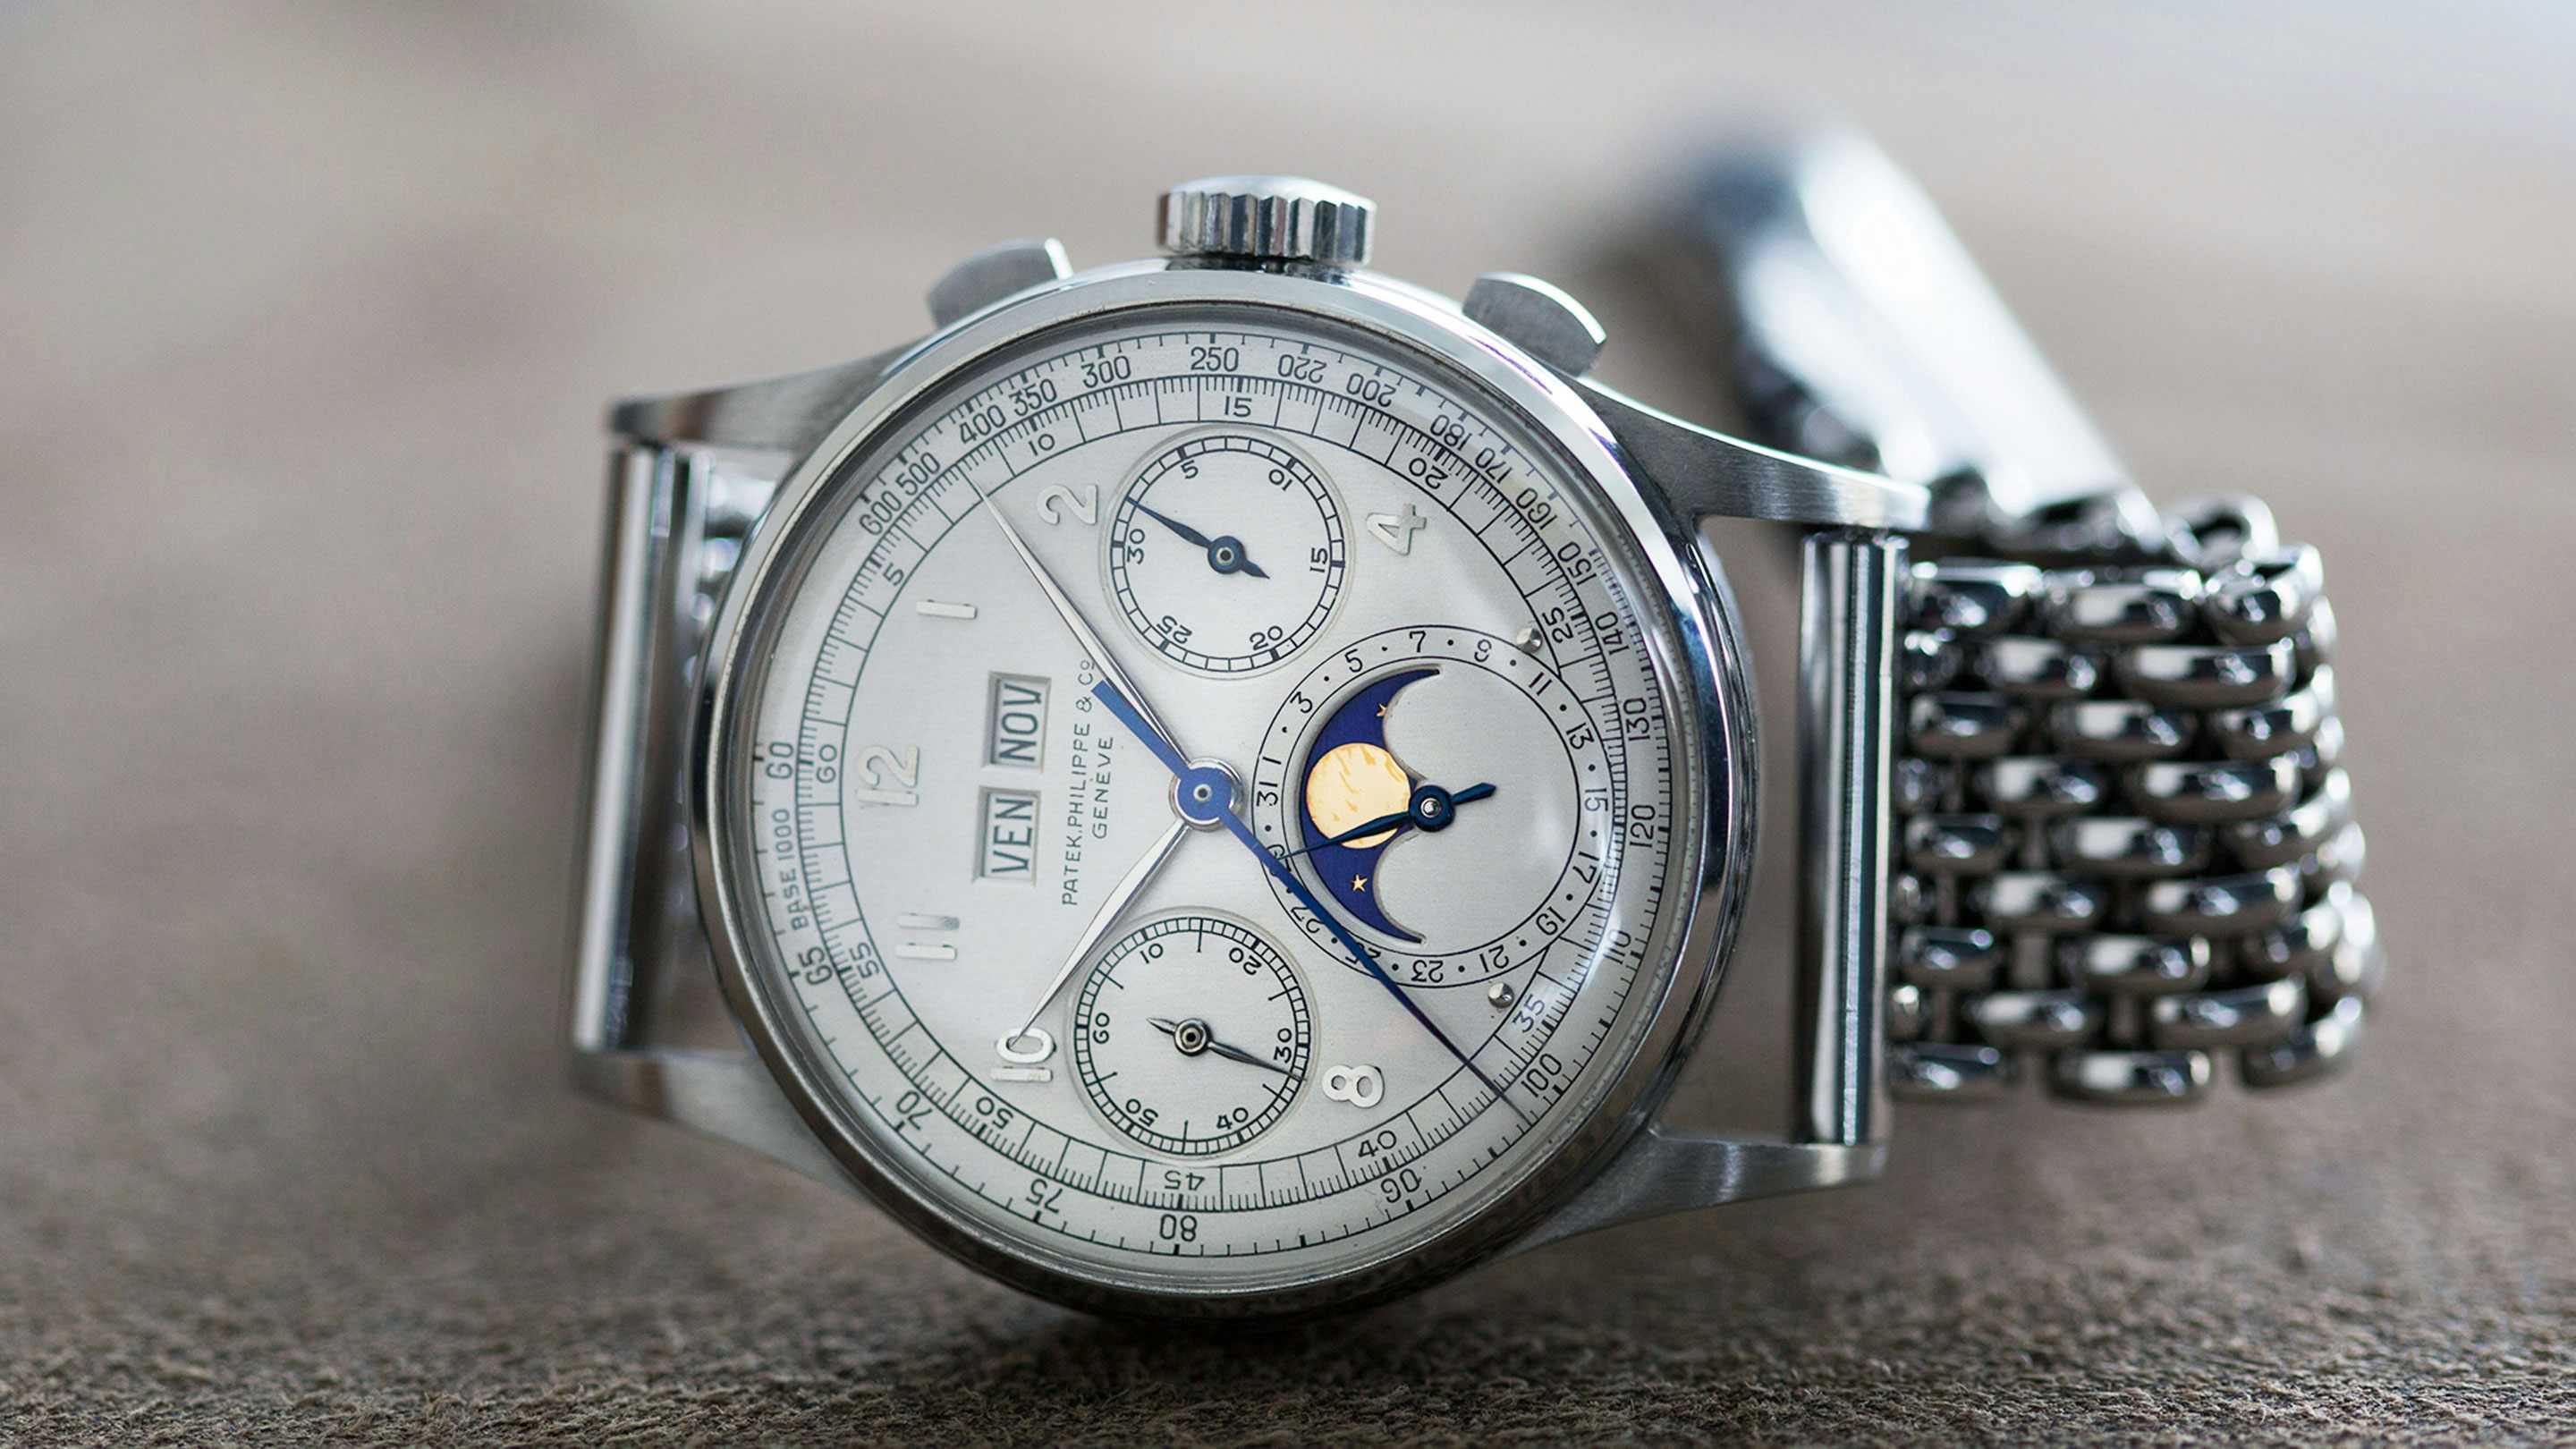 Breaking News: Stainless Steel Patek Philippe Ref. 1518 Sells For Over  $11,000,000 At Phillips Geneva (And Sets A New World Record For ANY  Wristwatch) - HODINKEE